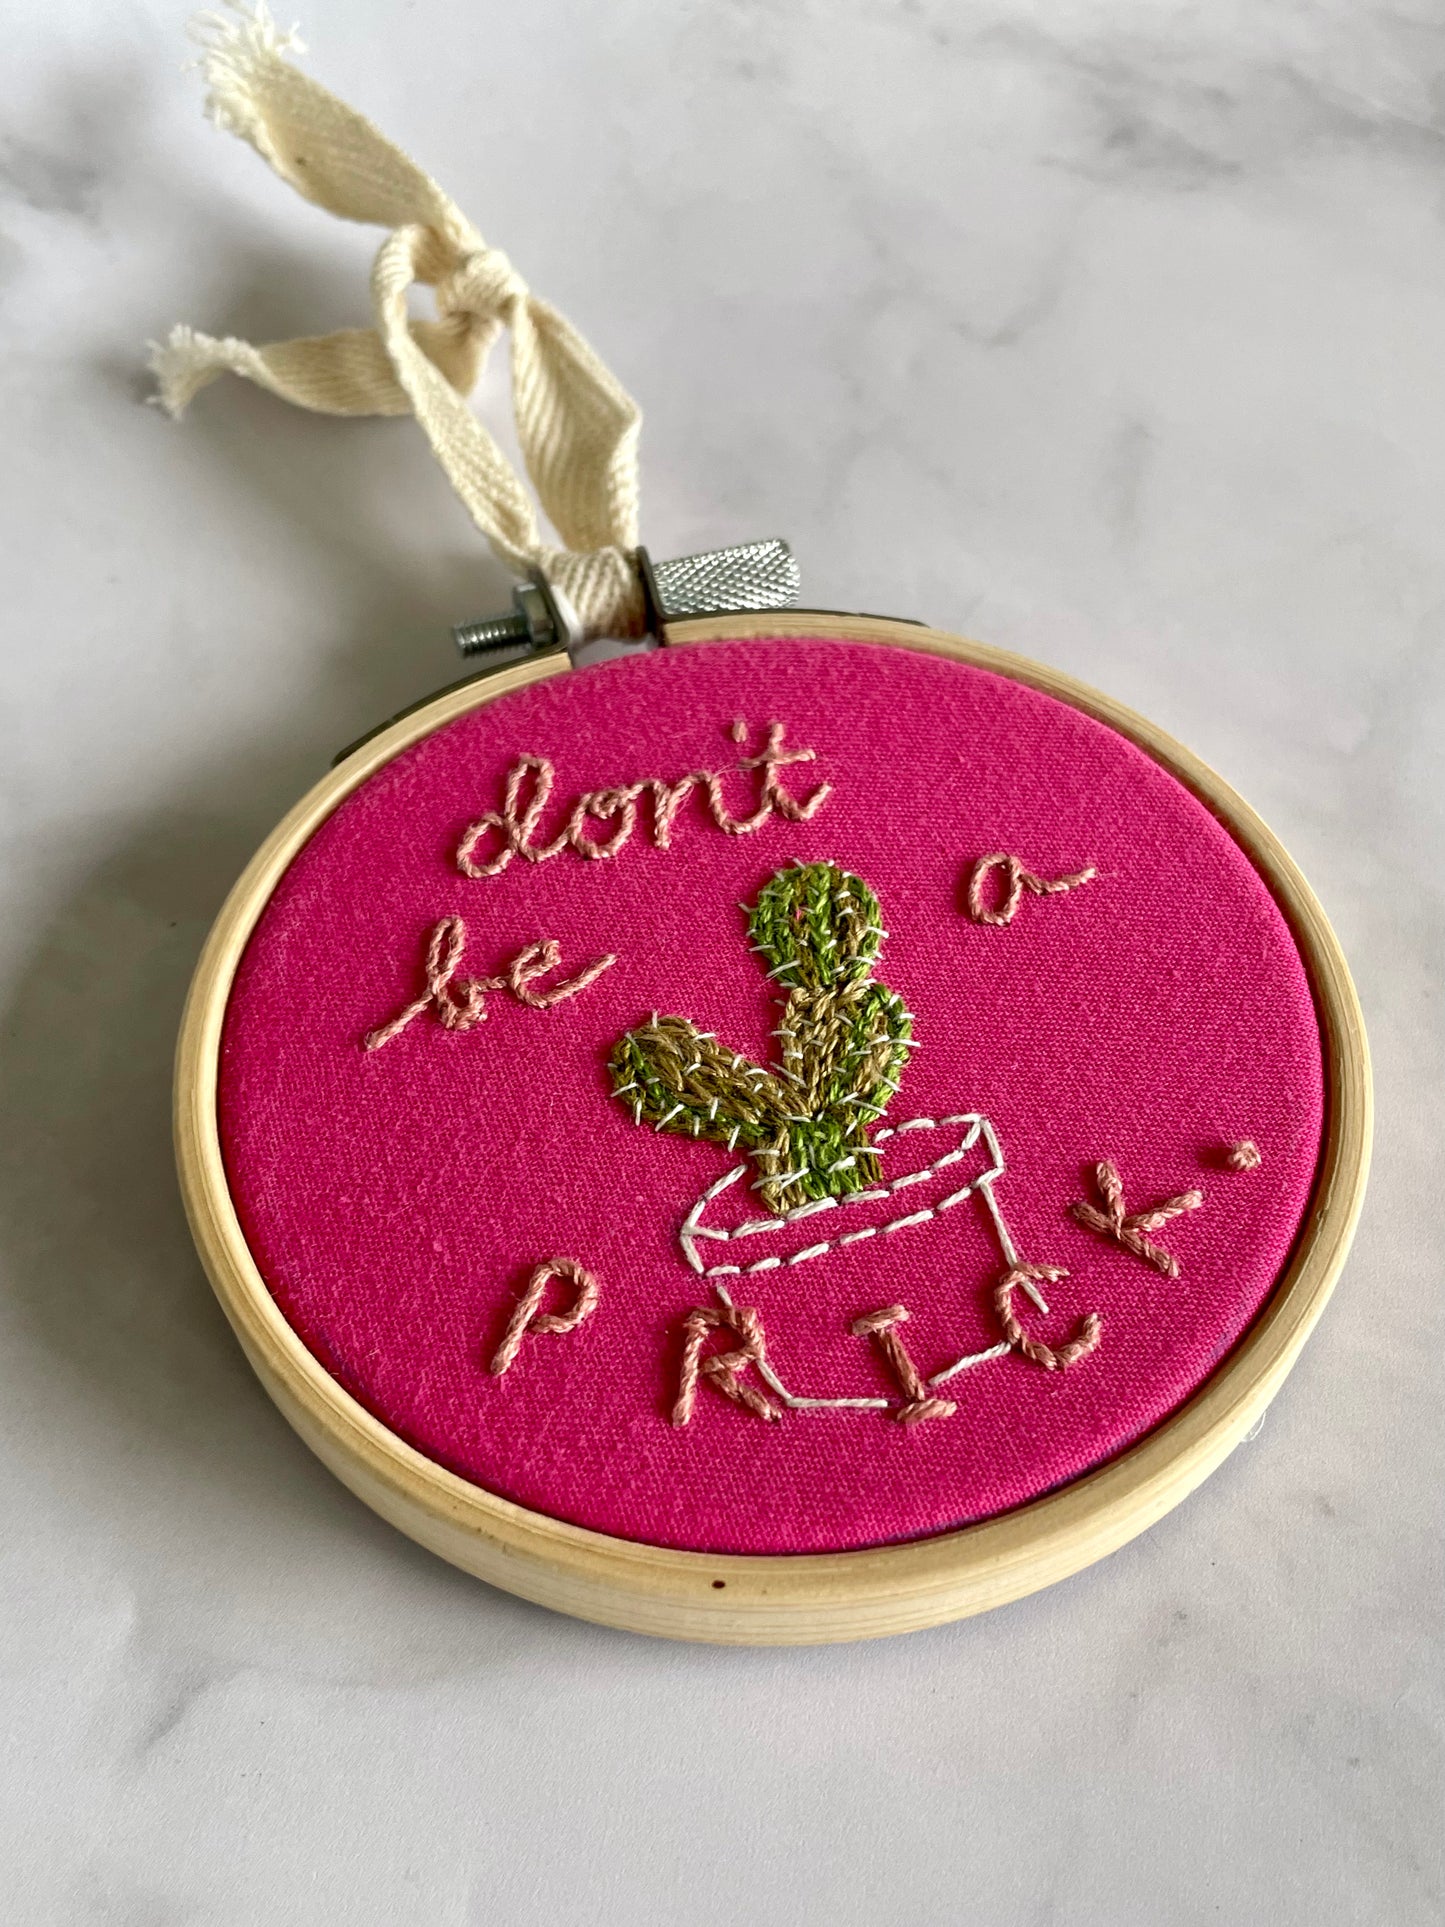 "Don't Be A Prick" 4" Embroidery